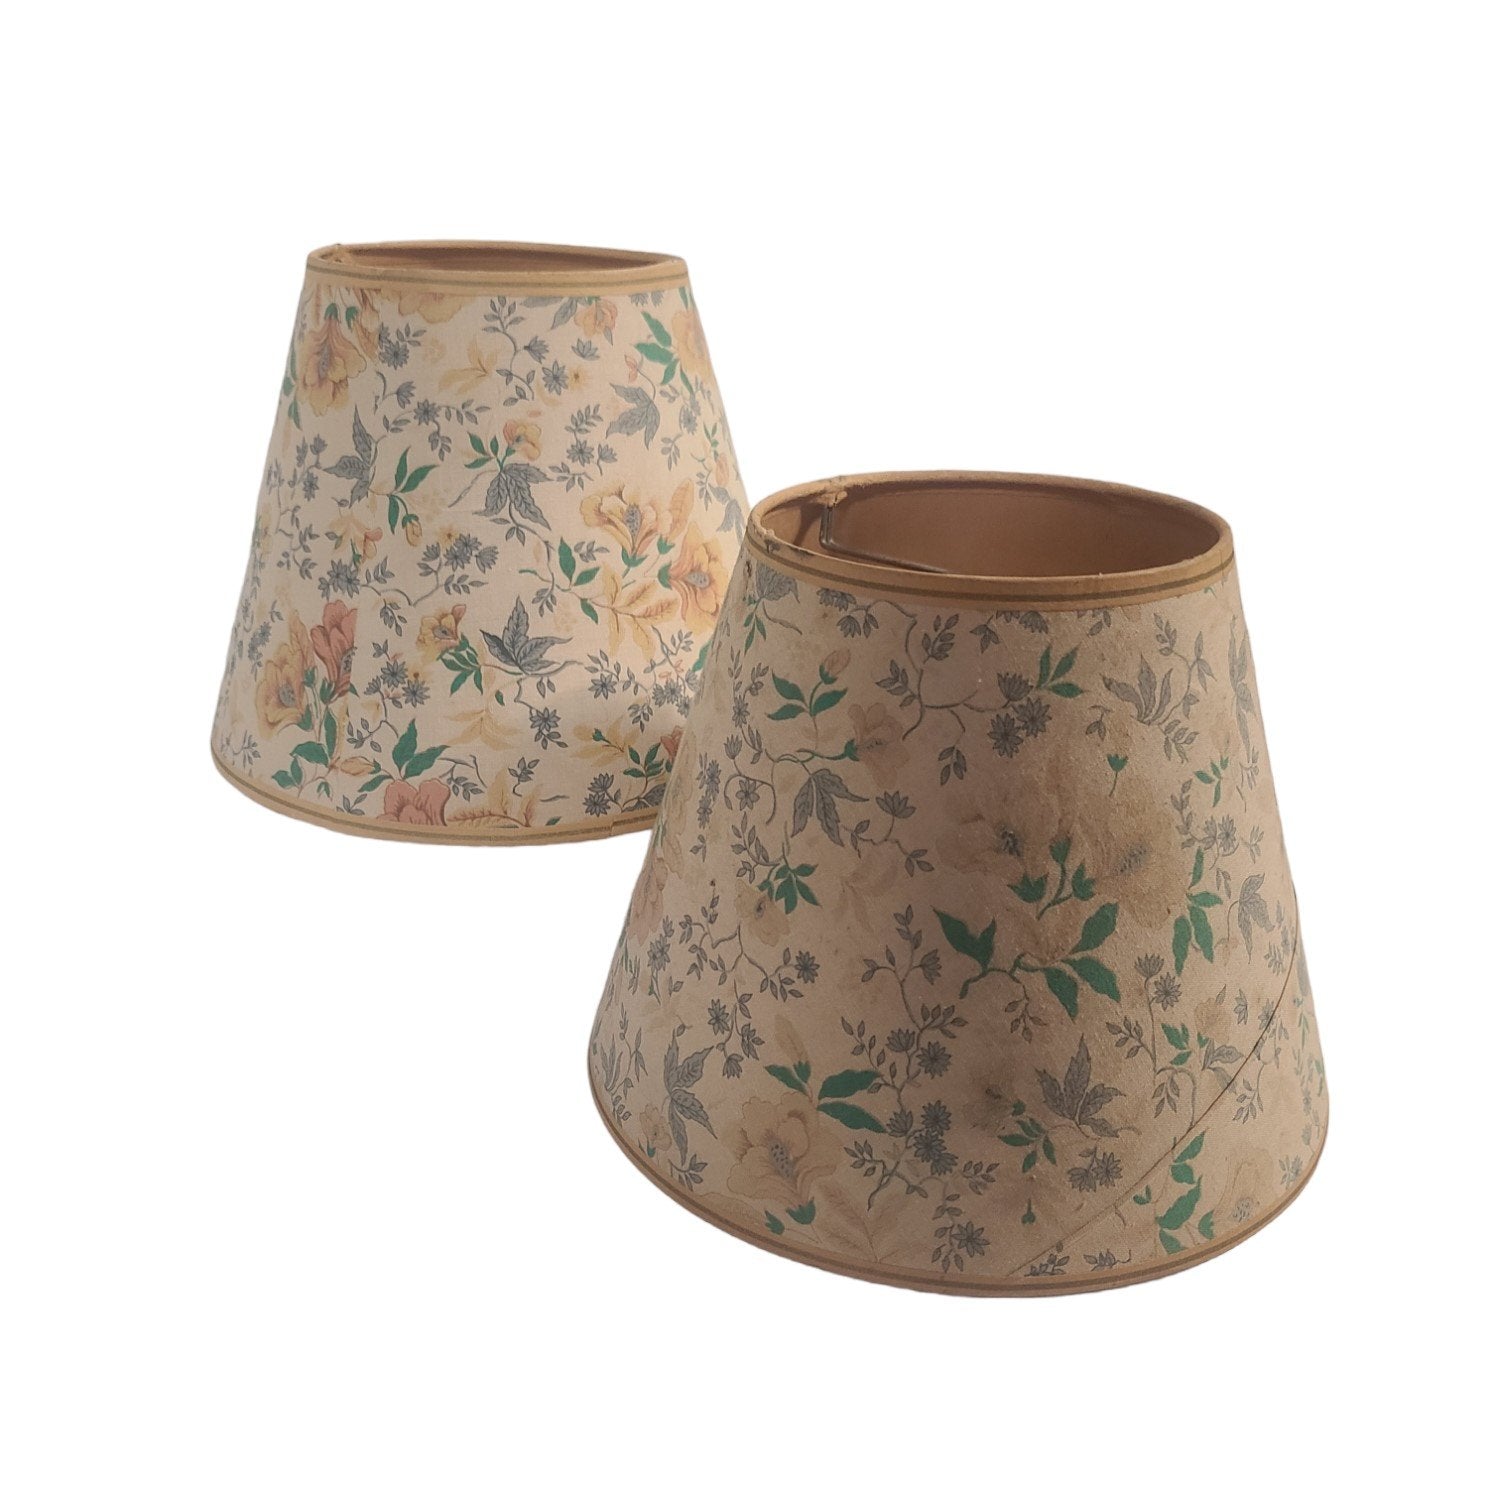 MCM Set of Two Matching Mid Century Lamp Shades Floral Tan Pastel Flowers